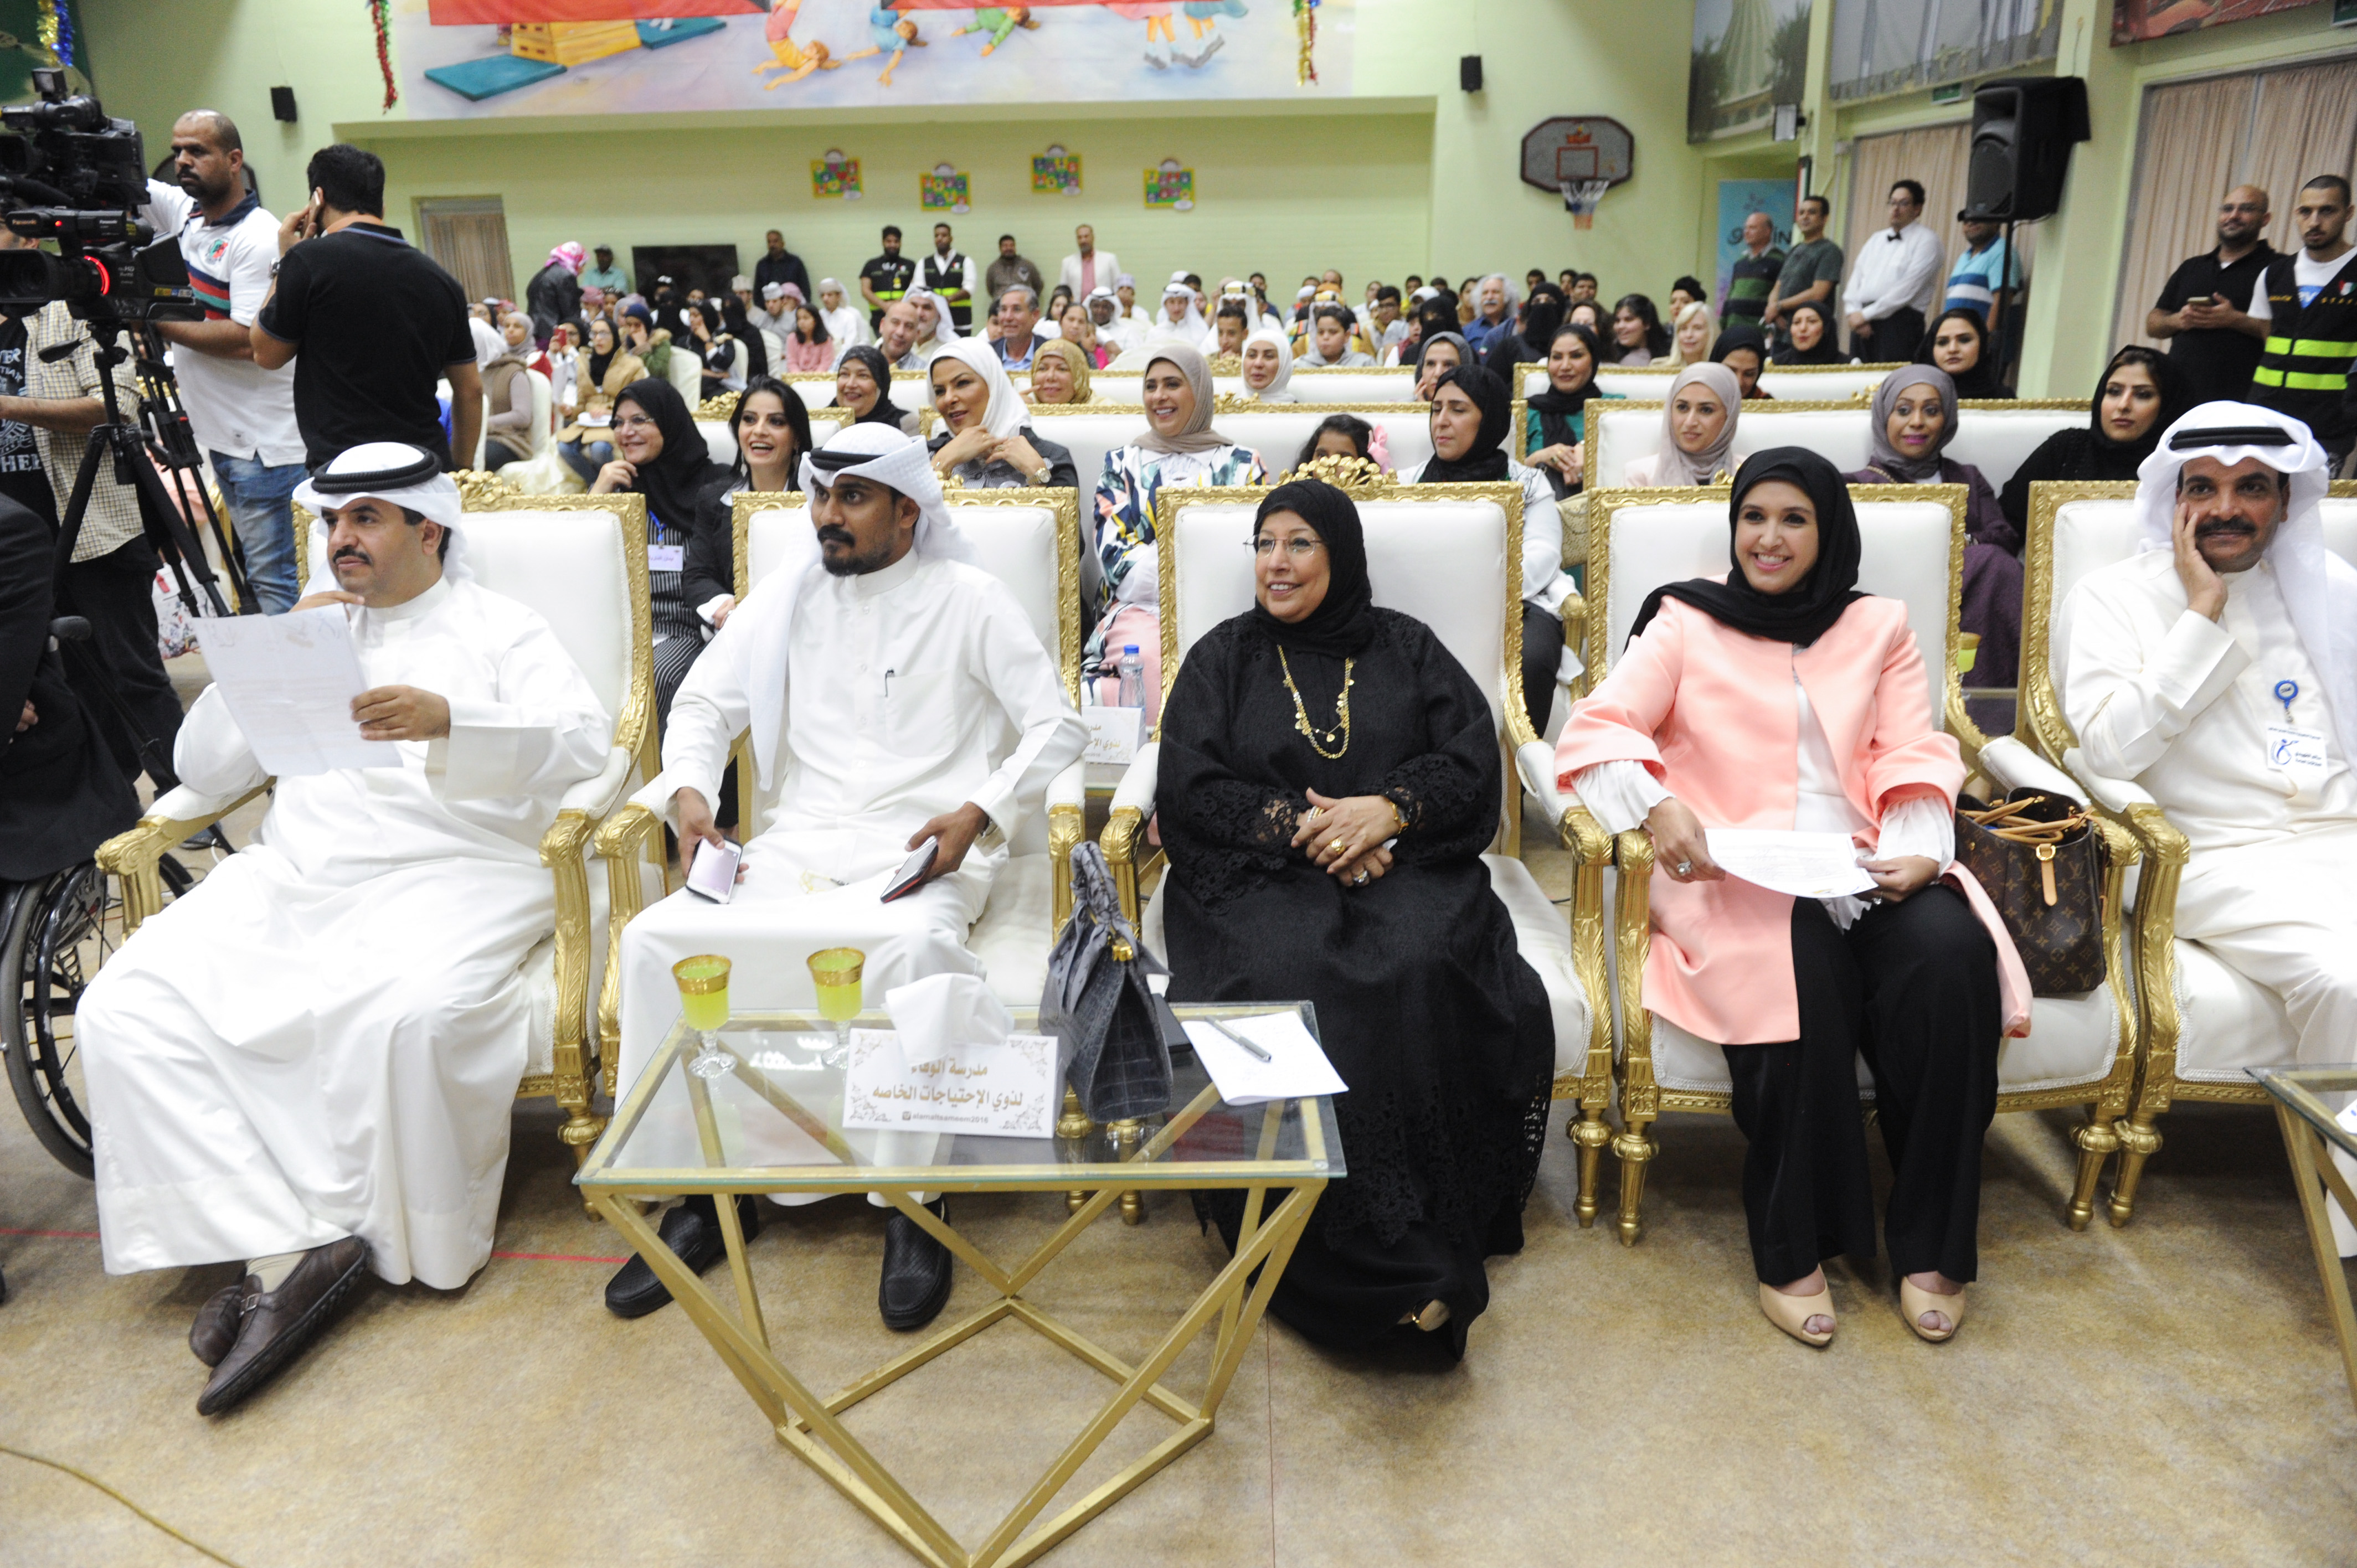 Some of audience attending the ceremony
